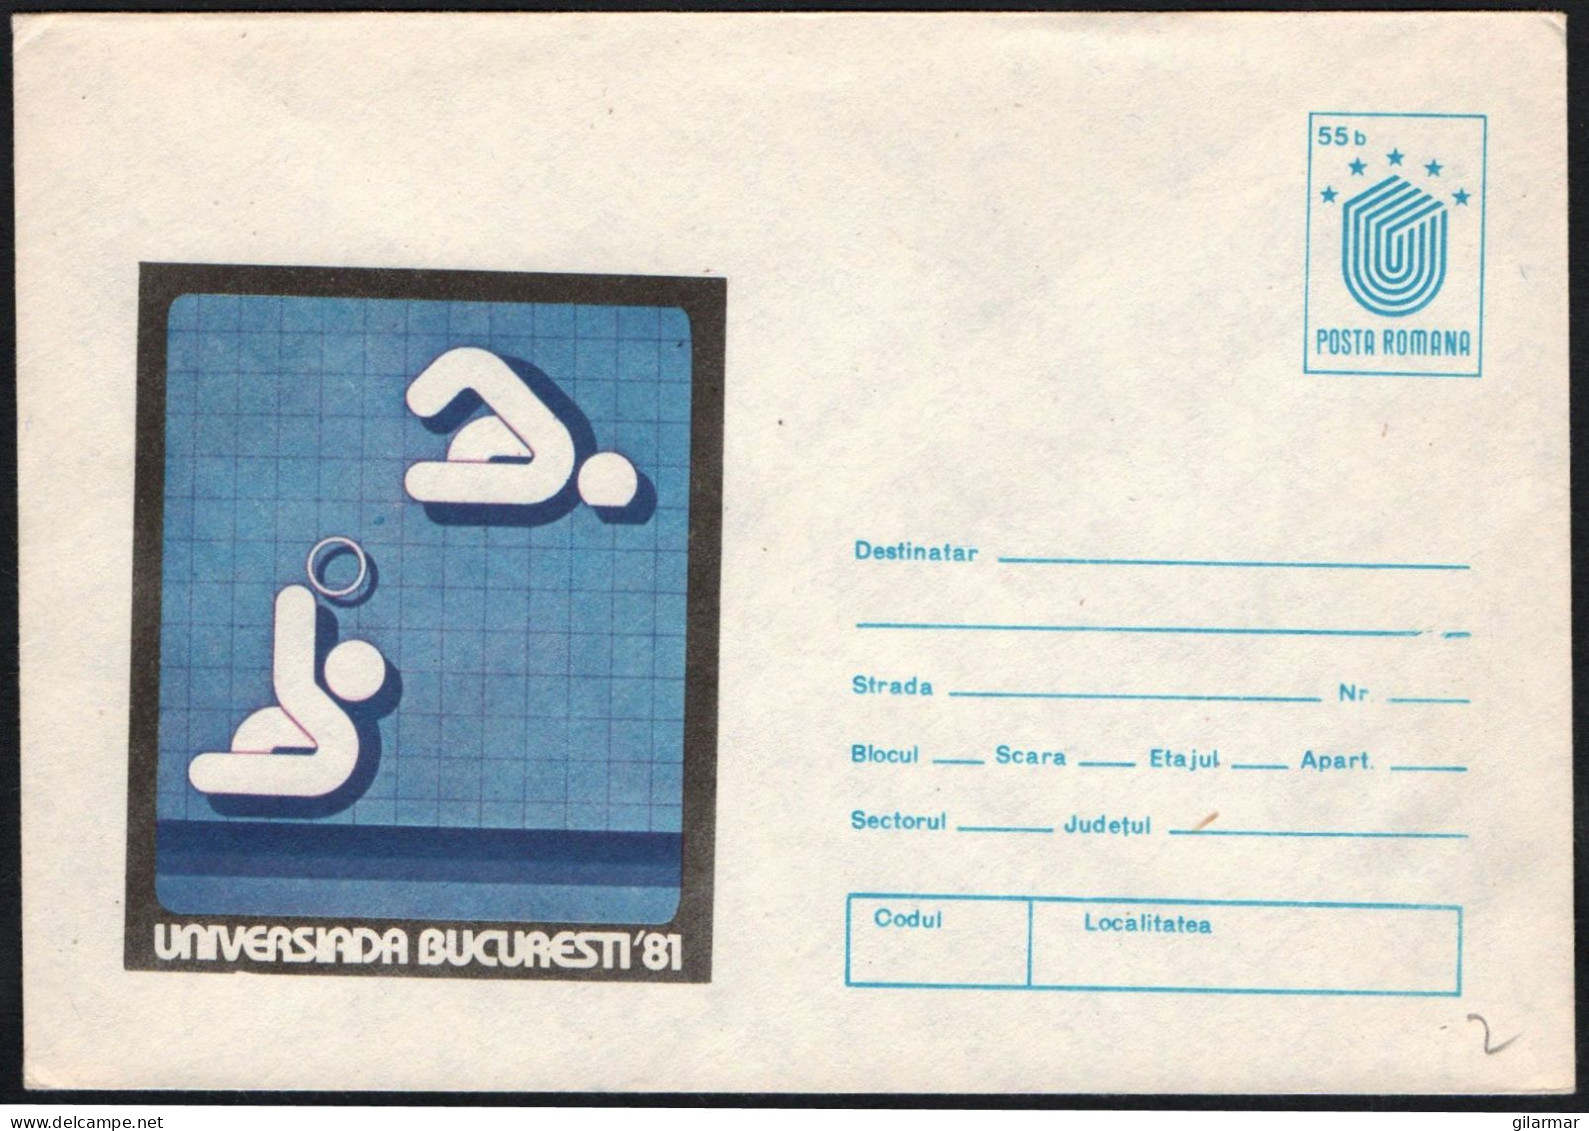 ROMANIA BUCHAREST 1981 - UNIVERSITY GAMES 1981 - STATIONARY: WATER POLO - MINT - G - Water-Polo